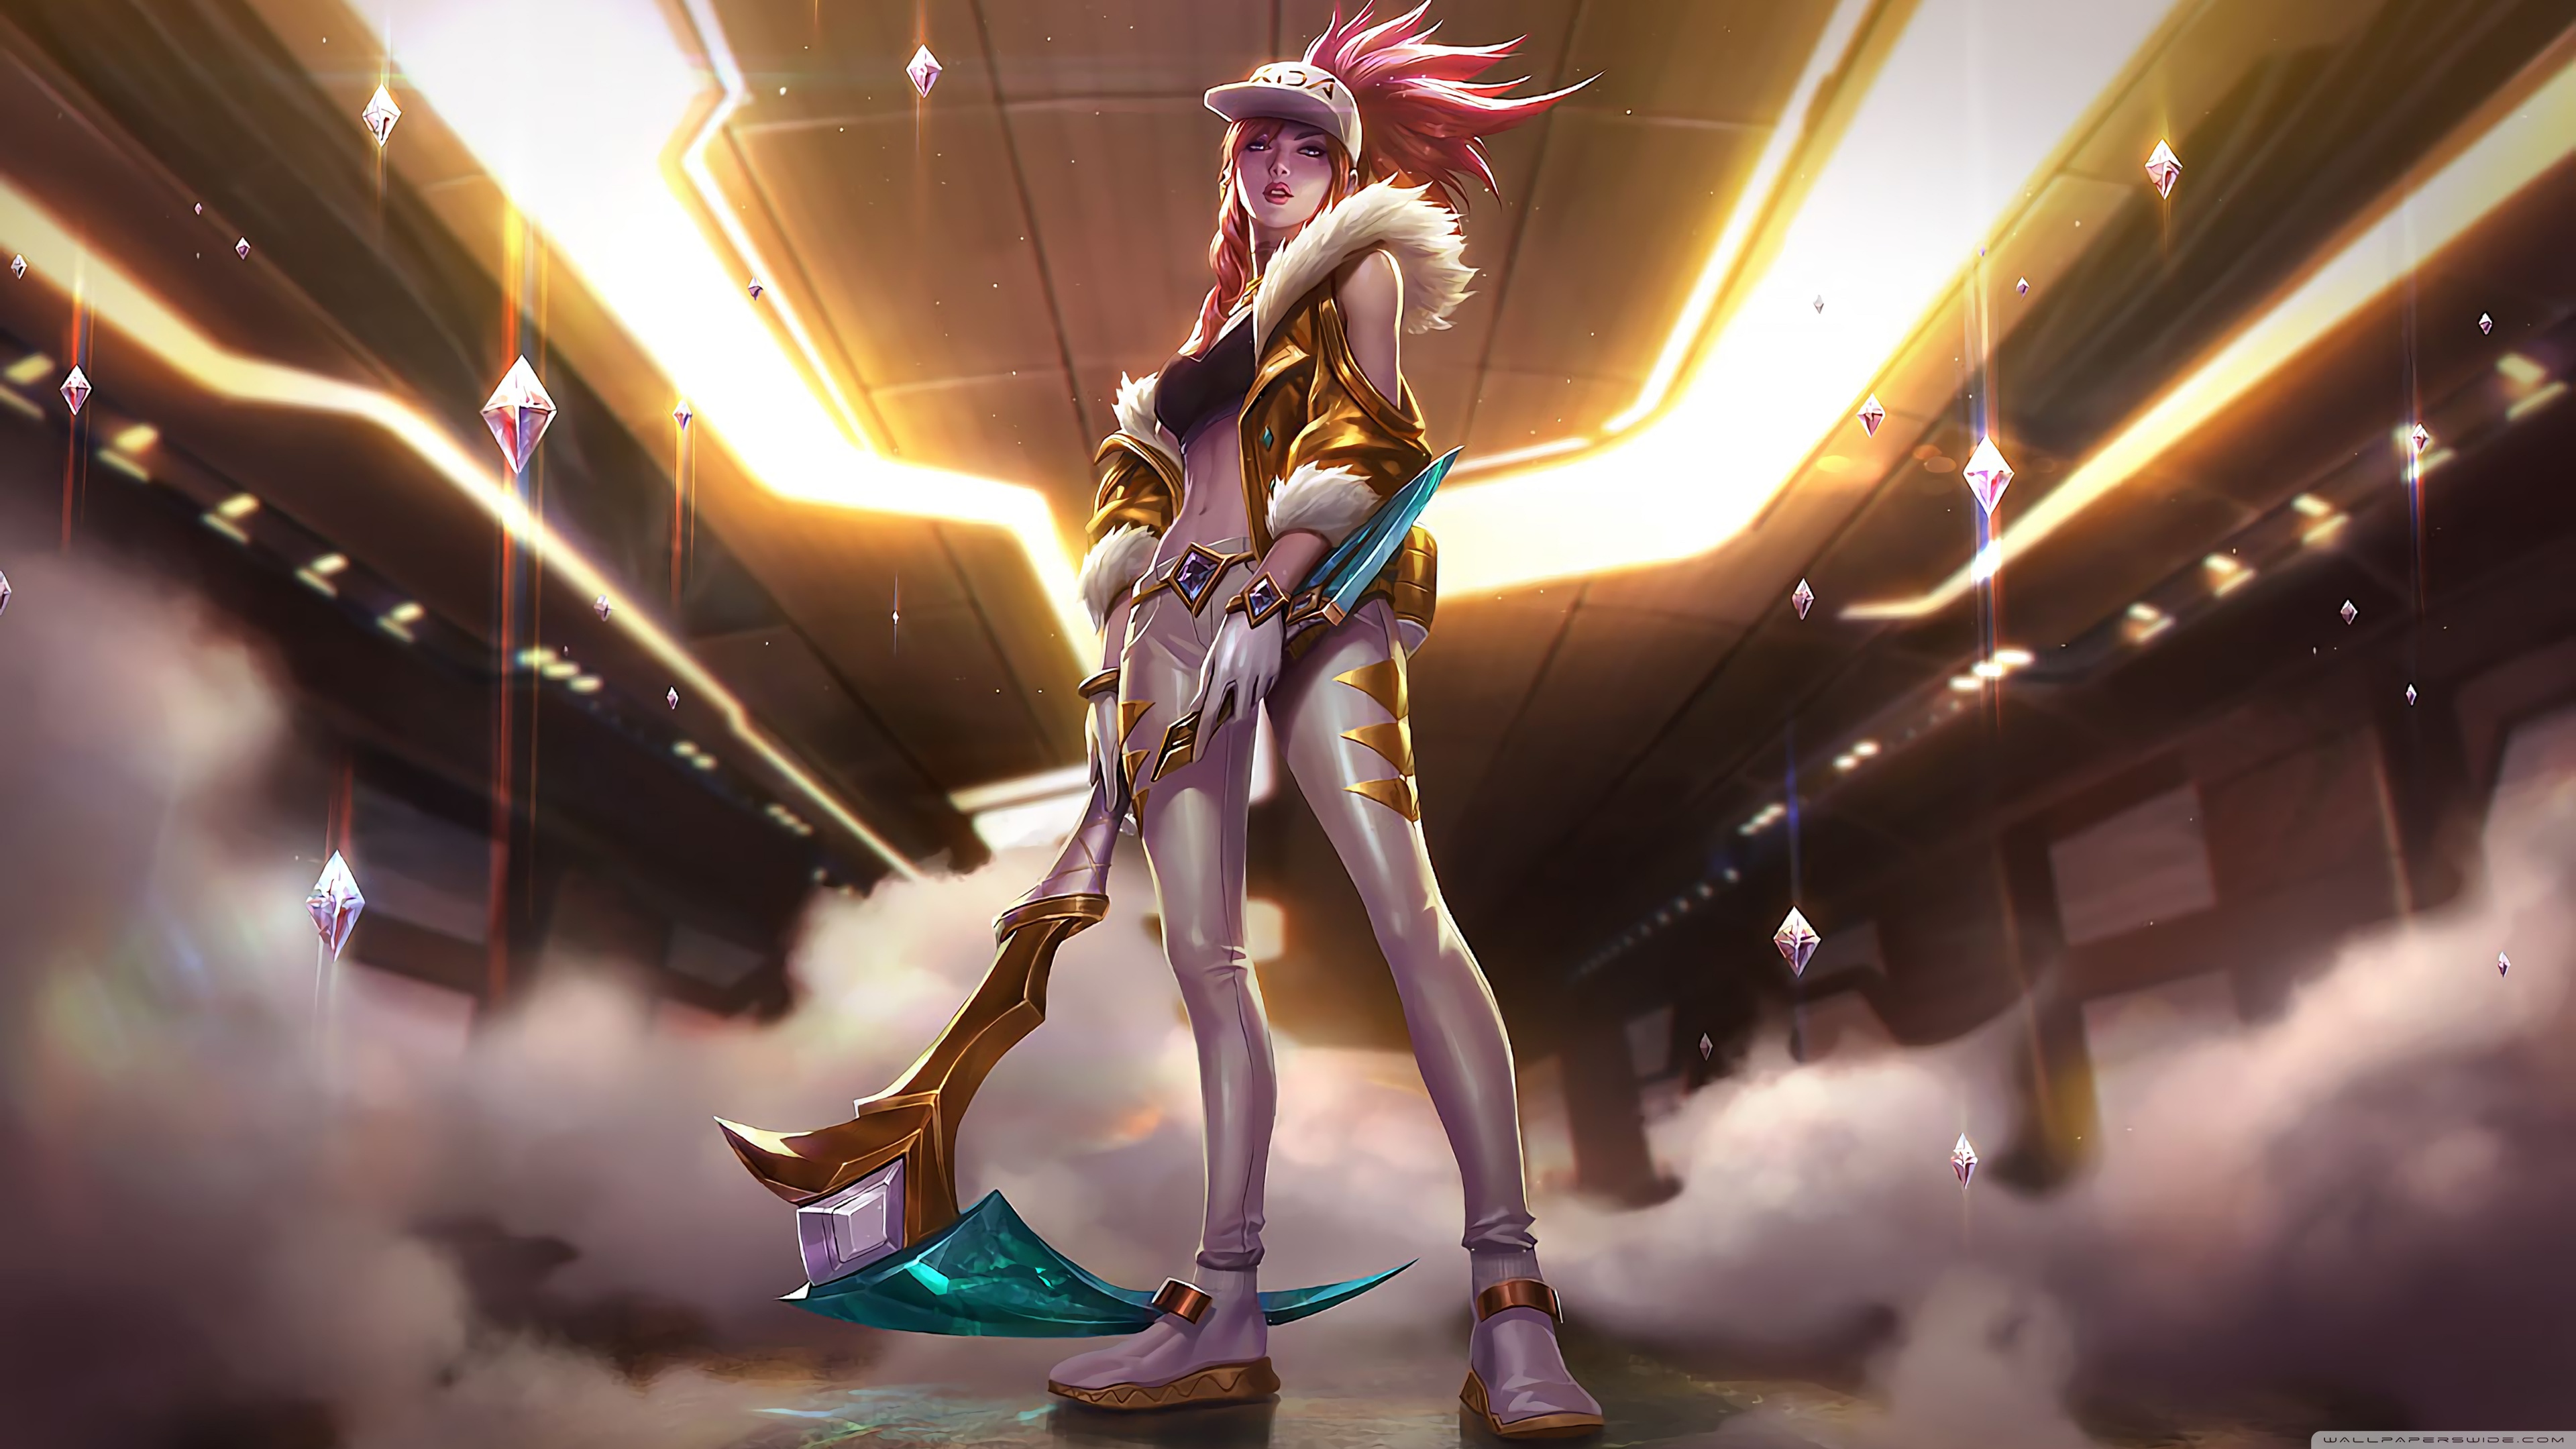 Featured image of post Kda Wallpaper Hd Desktop Customize your desktop mobile phone and tablet with our wide variety of cool and interesting kda wallpapers in just a few clicks